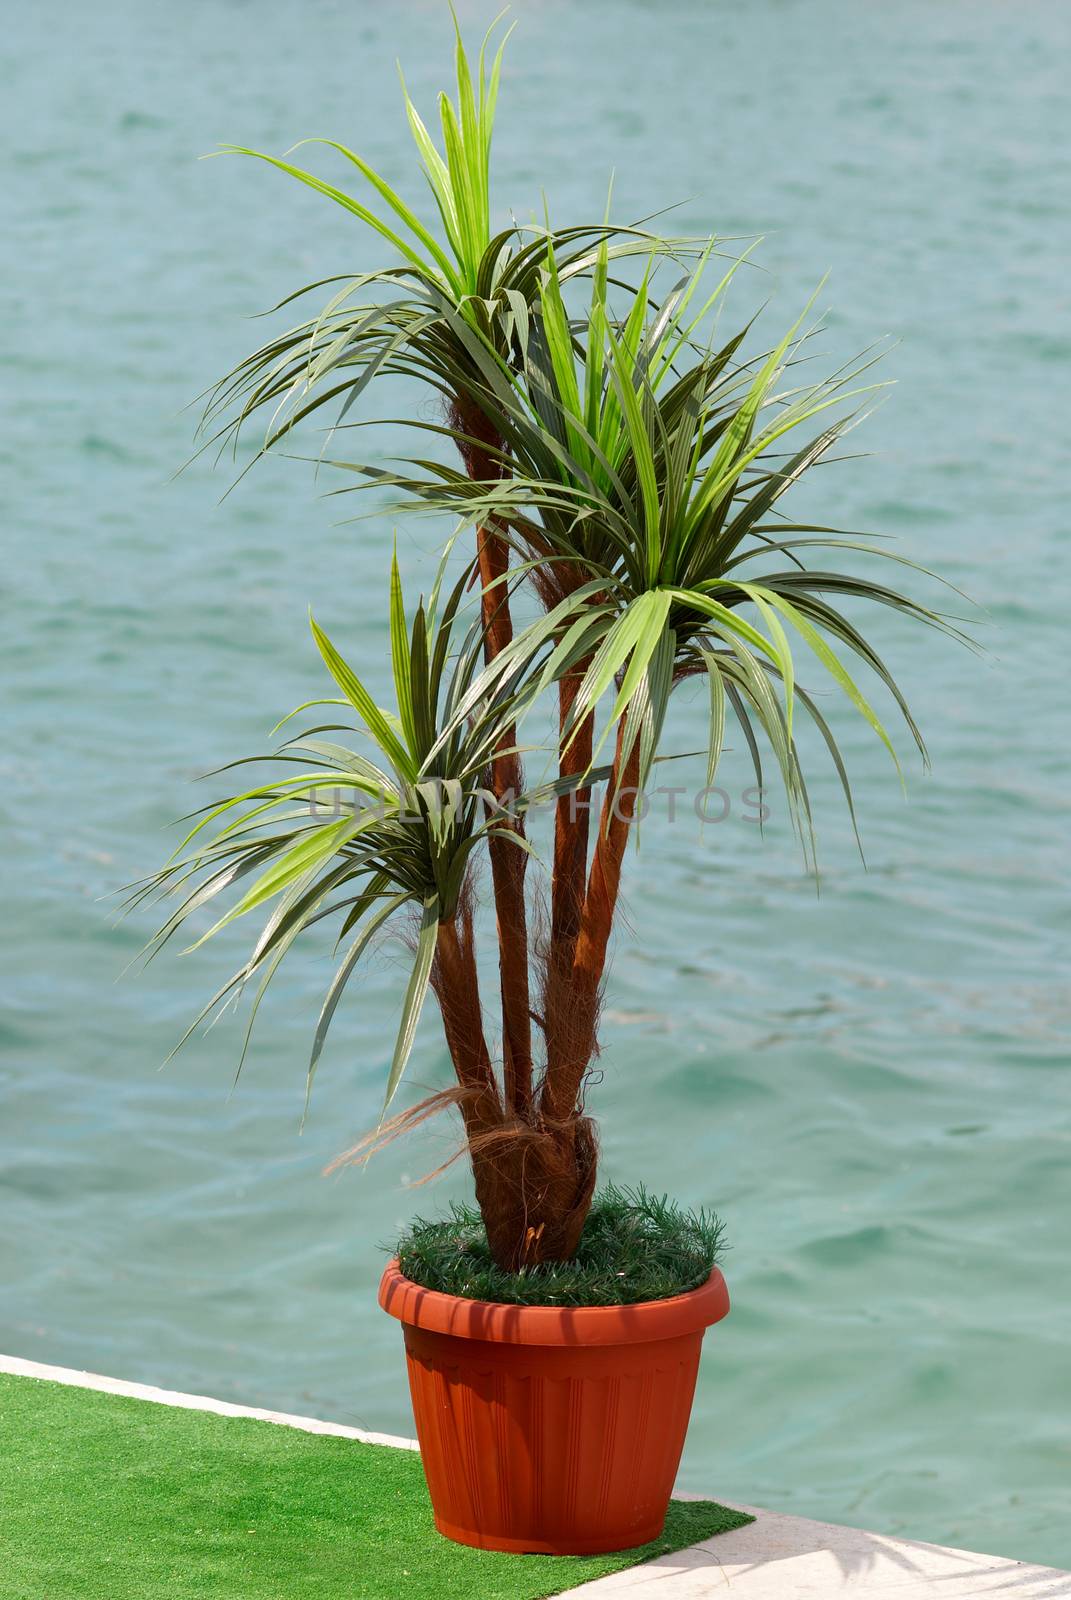 Green palm in the pot.